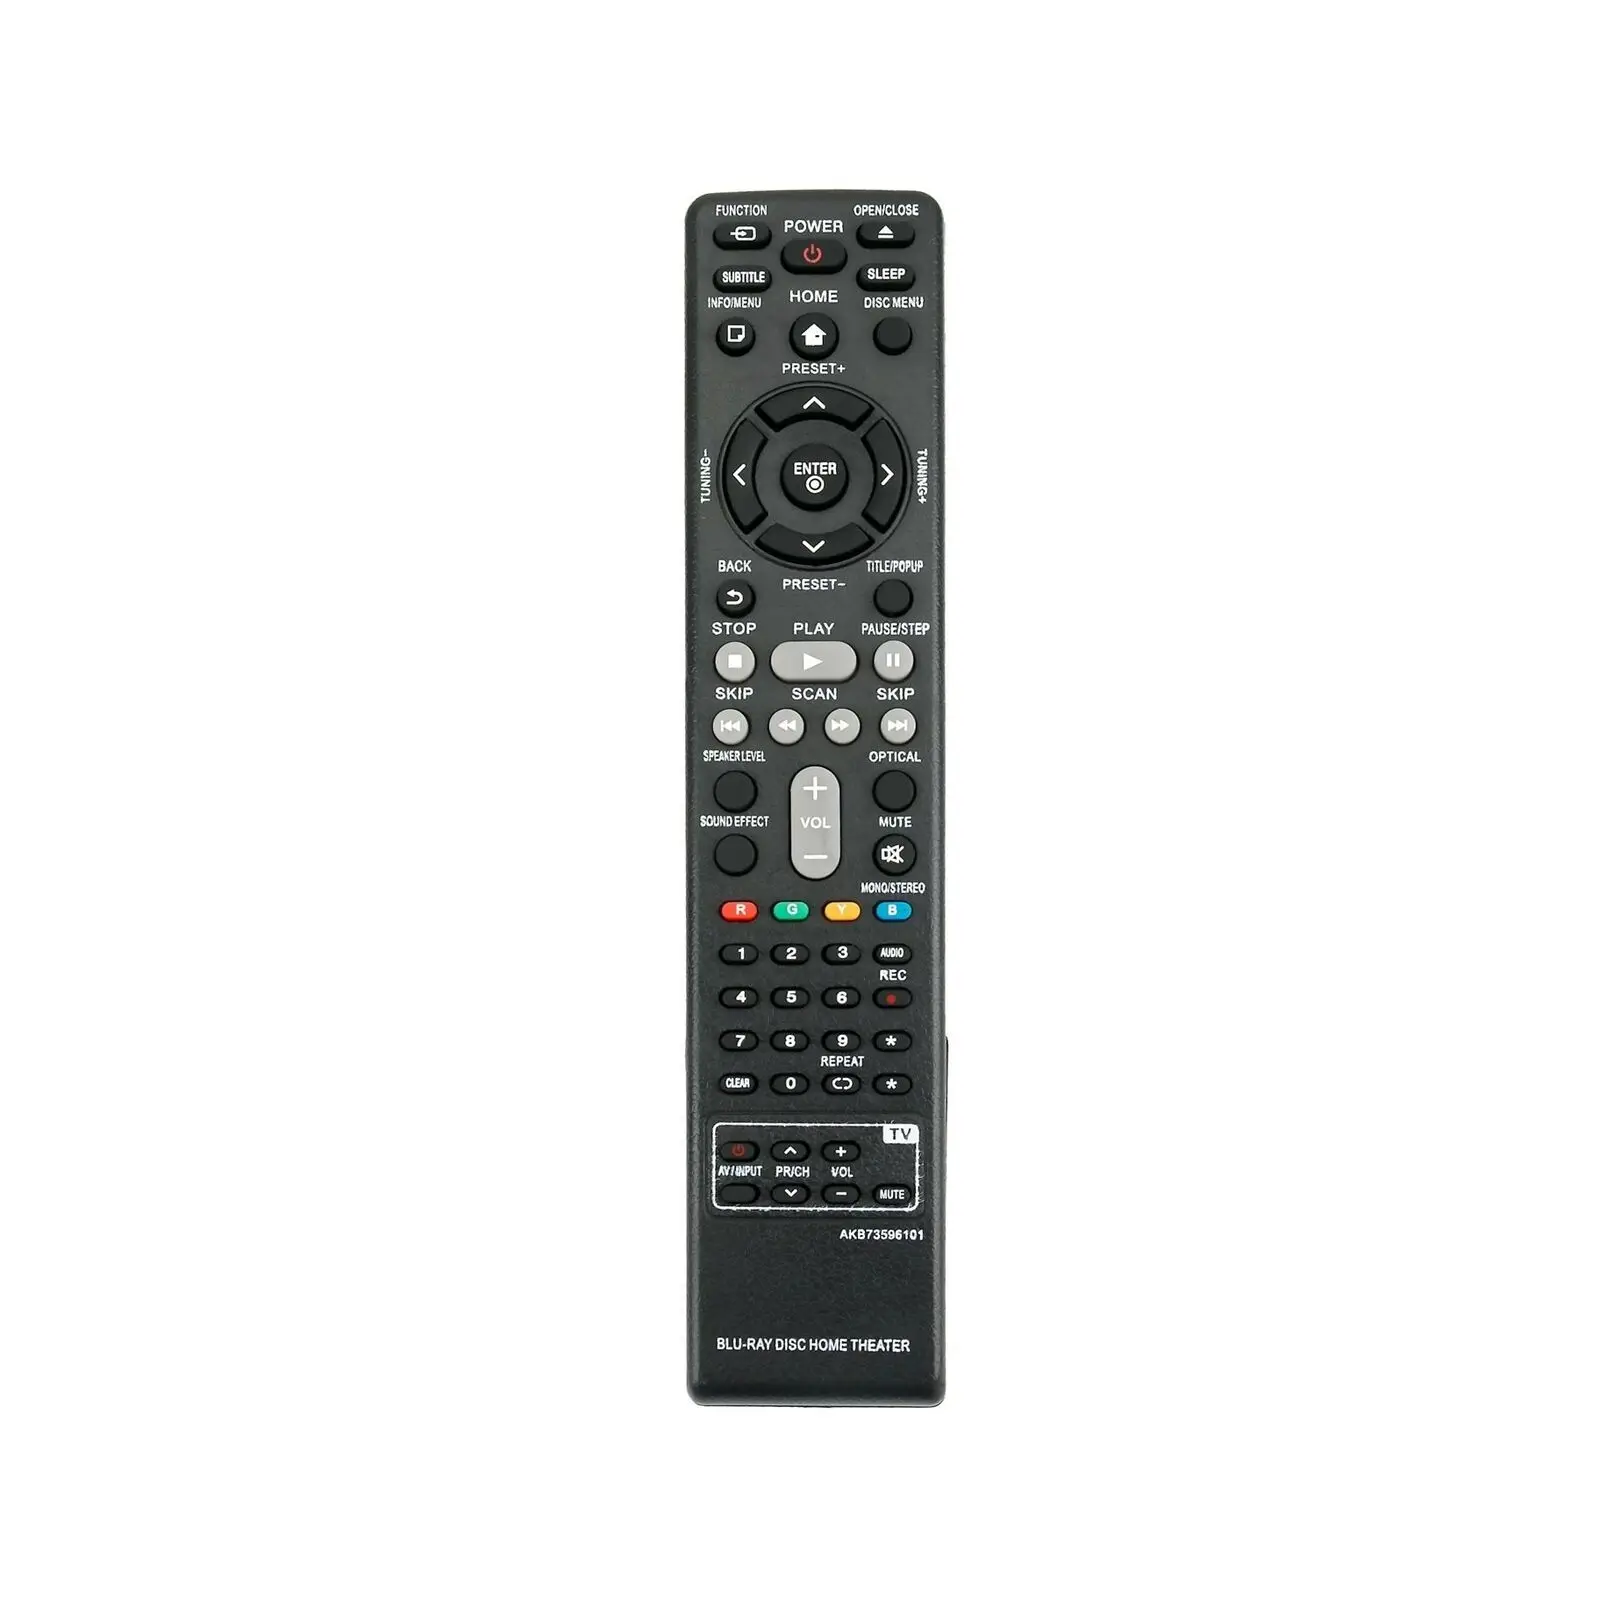 New Akb Remote Control For Lg Smart 3d Blu Ray Dvd Home Theater System Buy Akb Remote Control Use For Lg Dvd Home Theater Product On Alibaba Com